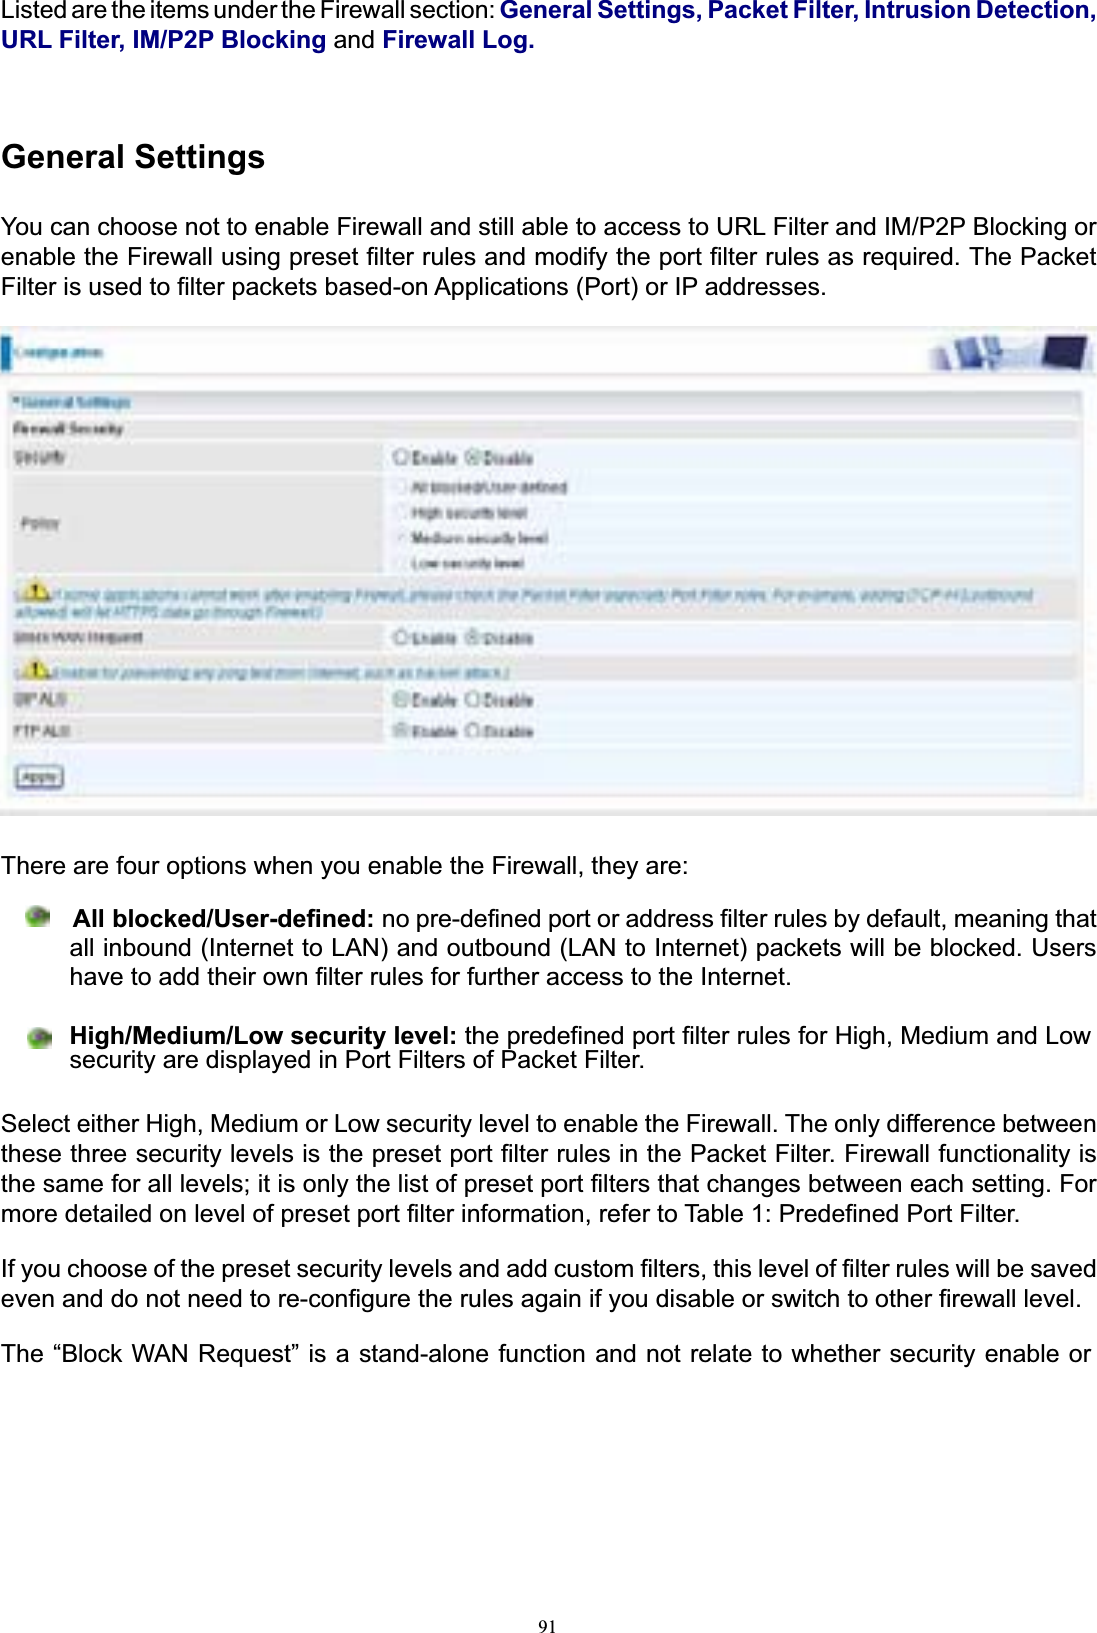 91Listed are the items under the Firewall section: General Settings, Packet Filter, Intrusion Detection, URL Filter, IM/P2P Blocking and Firewall Log.General SettingsYou can choose not to enable Firewall and still able to access to URL Filter and IM/P2P Blocking or enable the Firewall using preset filter rules and modify the port filter rules as required. The Packet Filter is used to filter packets based-on Applications (Port) or IP addresses. There are four options when you enable the Firewall, they are:      All blocked/User-defined: no pre-defined port or address filter rules by default, meaning that all inbound (Internet to LAN) and outbound (LAN to Internet) packets will be blocked. Users have to add their own filter rules for further access to the Internet. High/Medium/Low security level: the predefined port filter rules for High, Medium and Lowsecurity are displayed in Port Filters of Packet Filter. Select either High, Medium or Low security level to enable the Firewall. The only difference between these three security levels is the preset port filter rules in the Packet Filter. Firewall functionality is the same for all levels; it is only the list of preset port filters that changes between each setting. For more detailed on level of preset port filter information, refer to Table 1: Predefined Port Filter. If you choose of the preset security levels and add custom filters, this level of filter rules will be saved even and do not need to re-configure the rules again if you disable or switch to other firewall level. The “Block WAN Request” is a stand-alone function and not relate to whether security enable or 